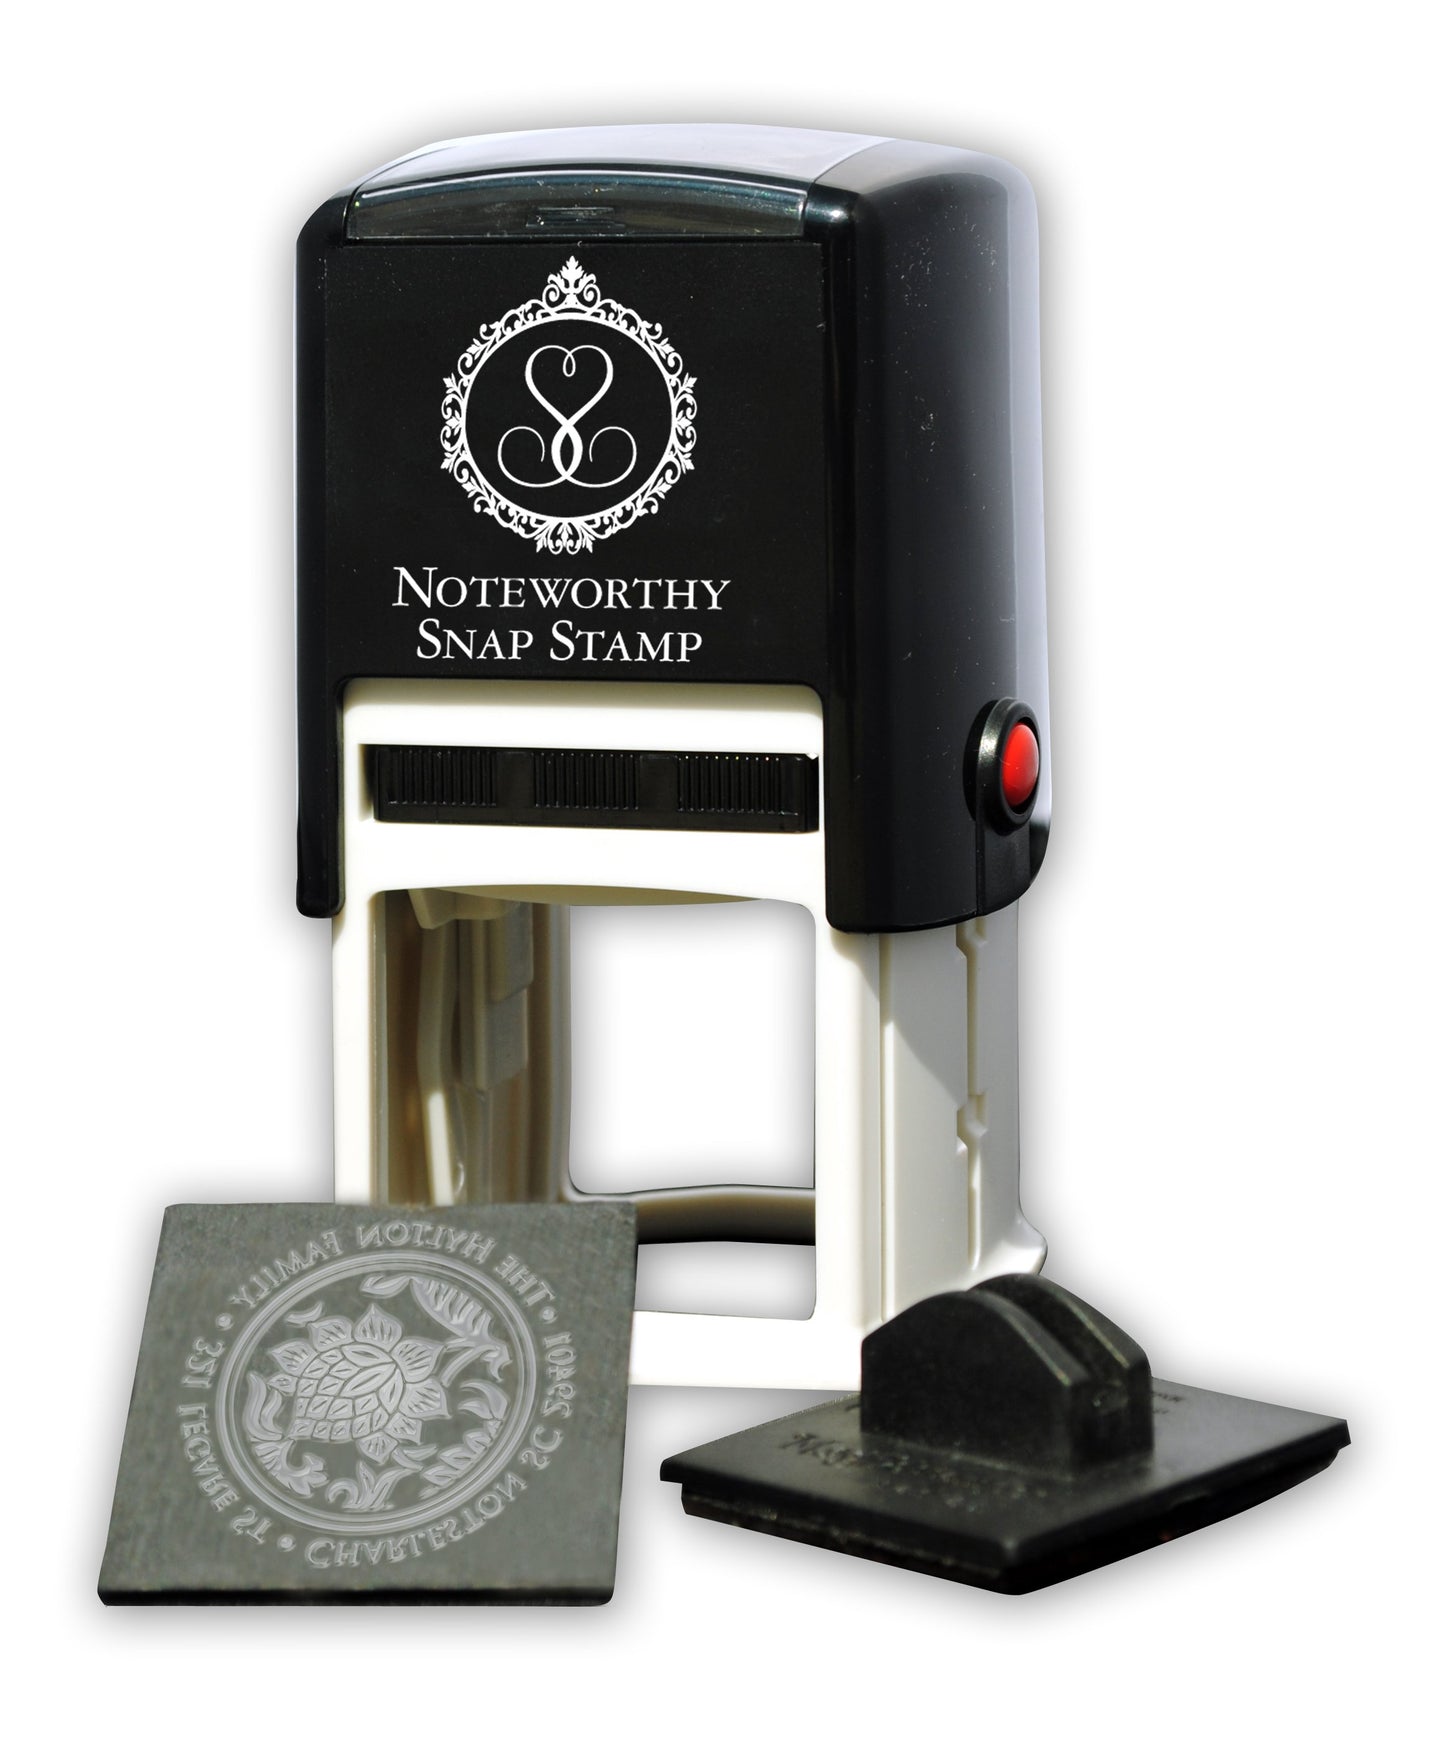 Capital of New Mexico Stamper or Embosser